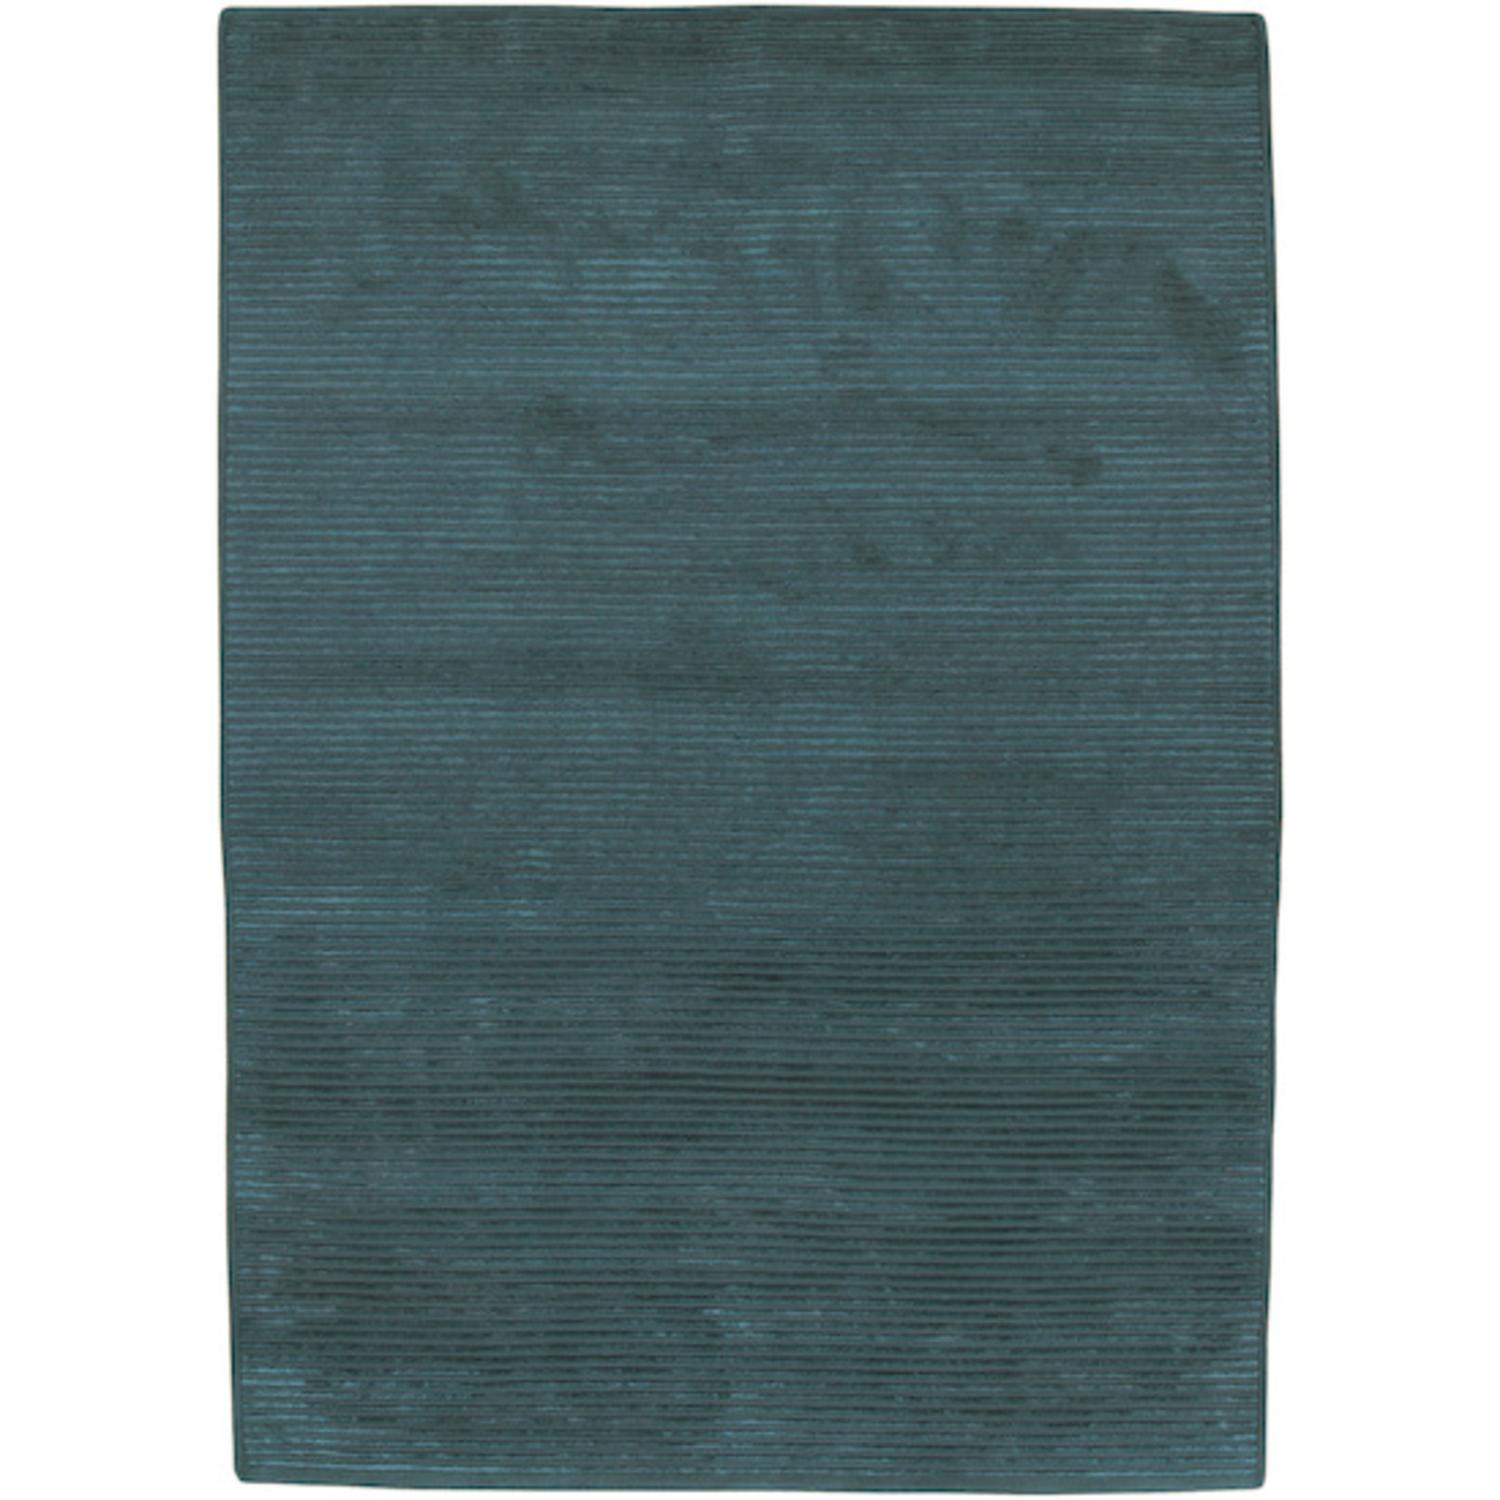 CC Home Furnishings 5' x 8' Solitary Teal Blue and Green Rectangular Wool Area Throw Rug